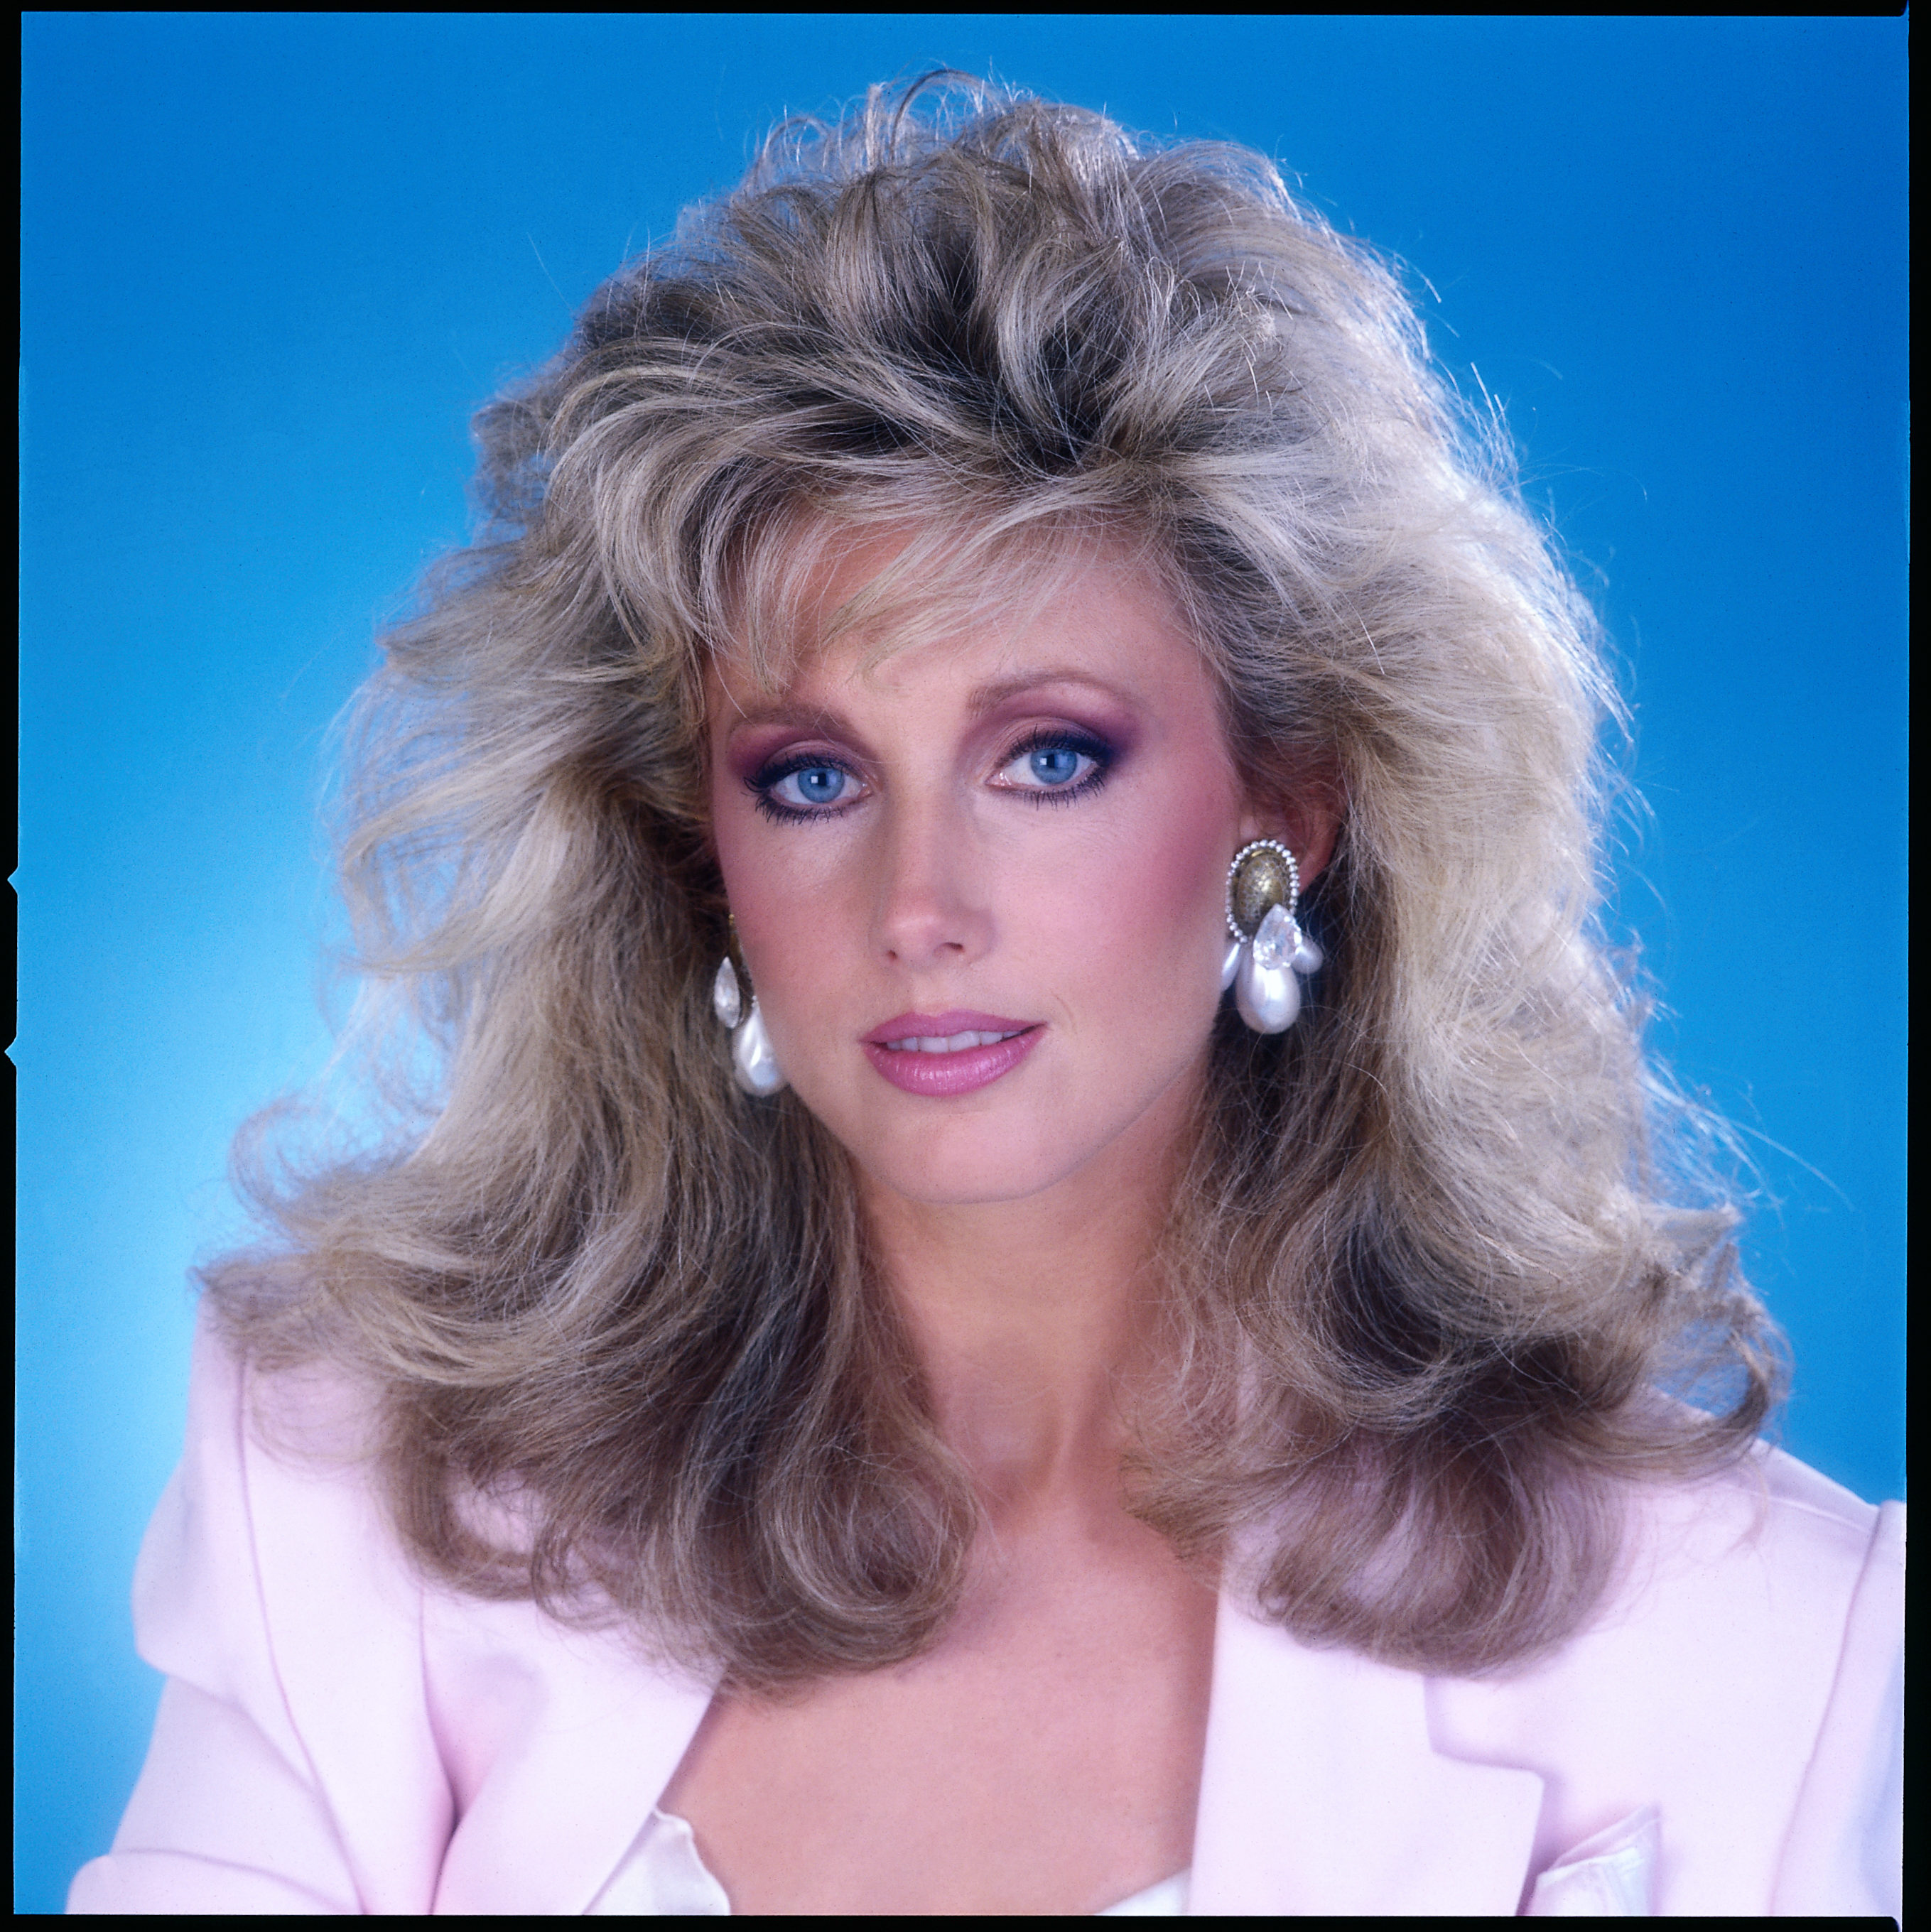 Morgan Fairchild as Jordan Roberts on "Falcon Crest," on November 14, 1985 | Source: Getty Images